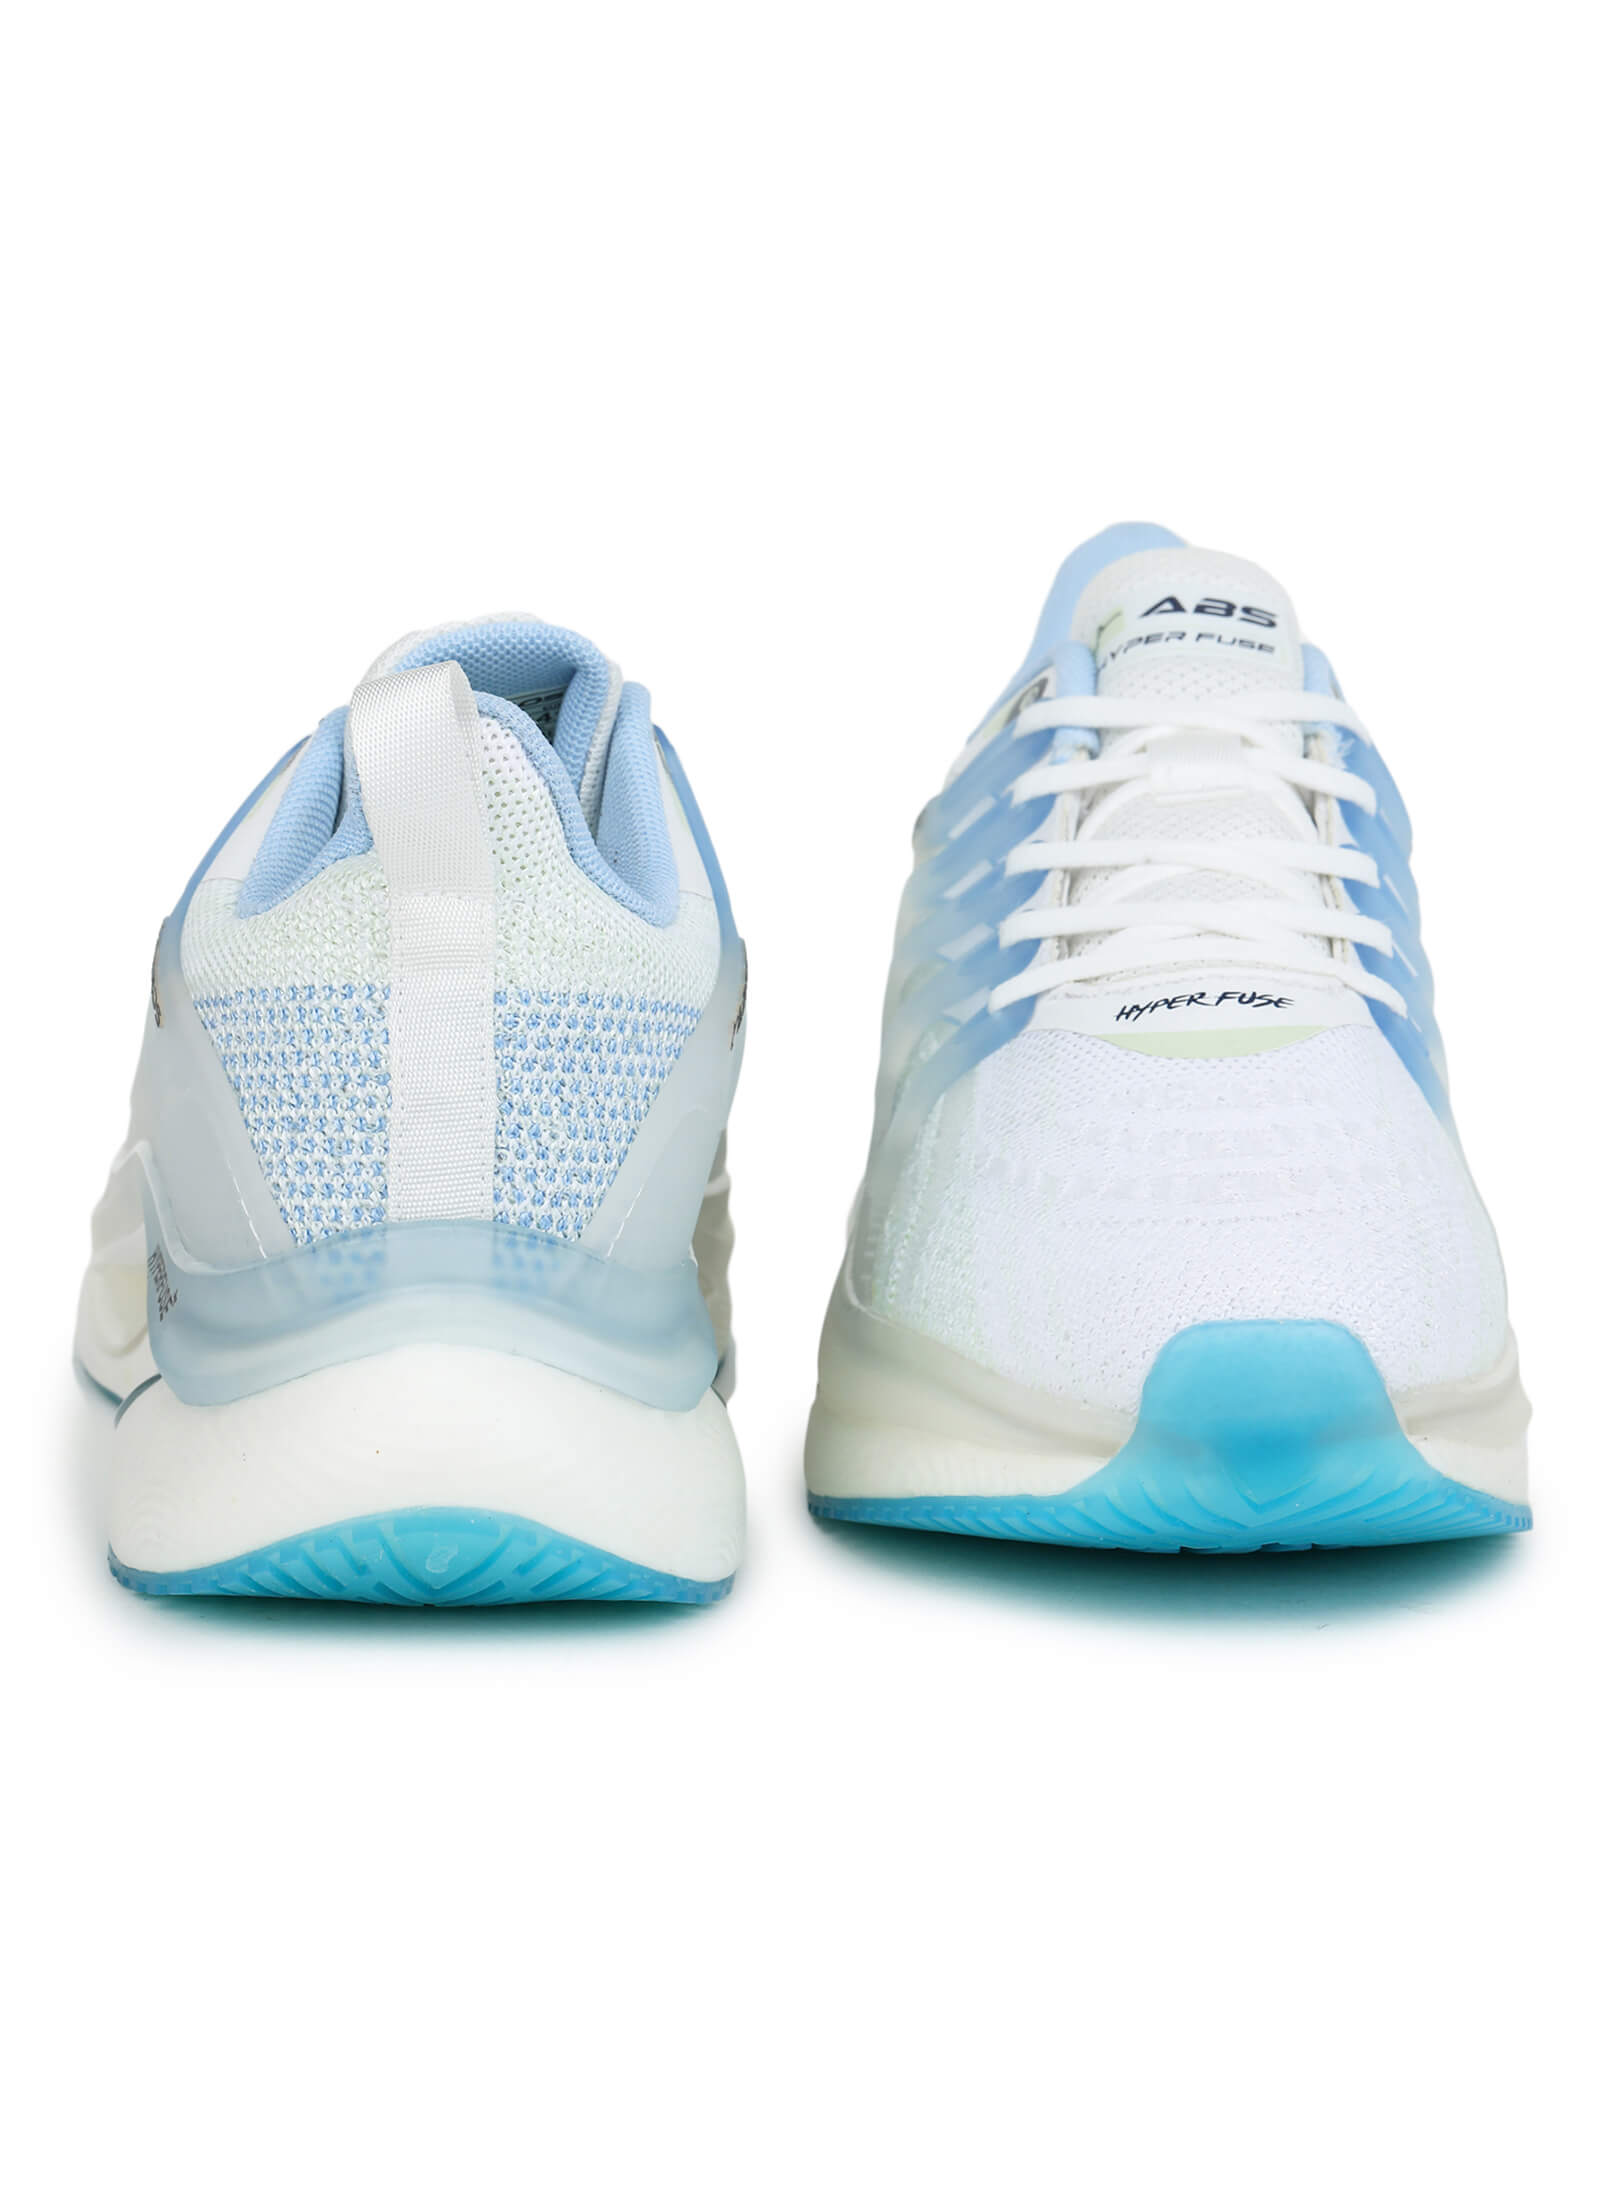 Tauro Hyper Fuse Sports Shoes For Men